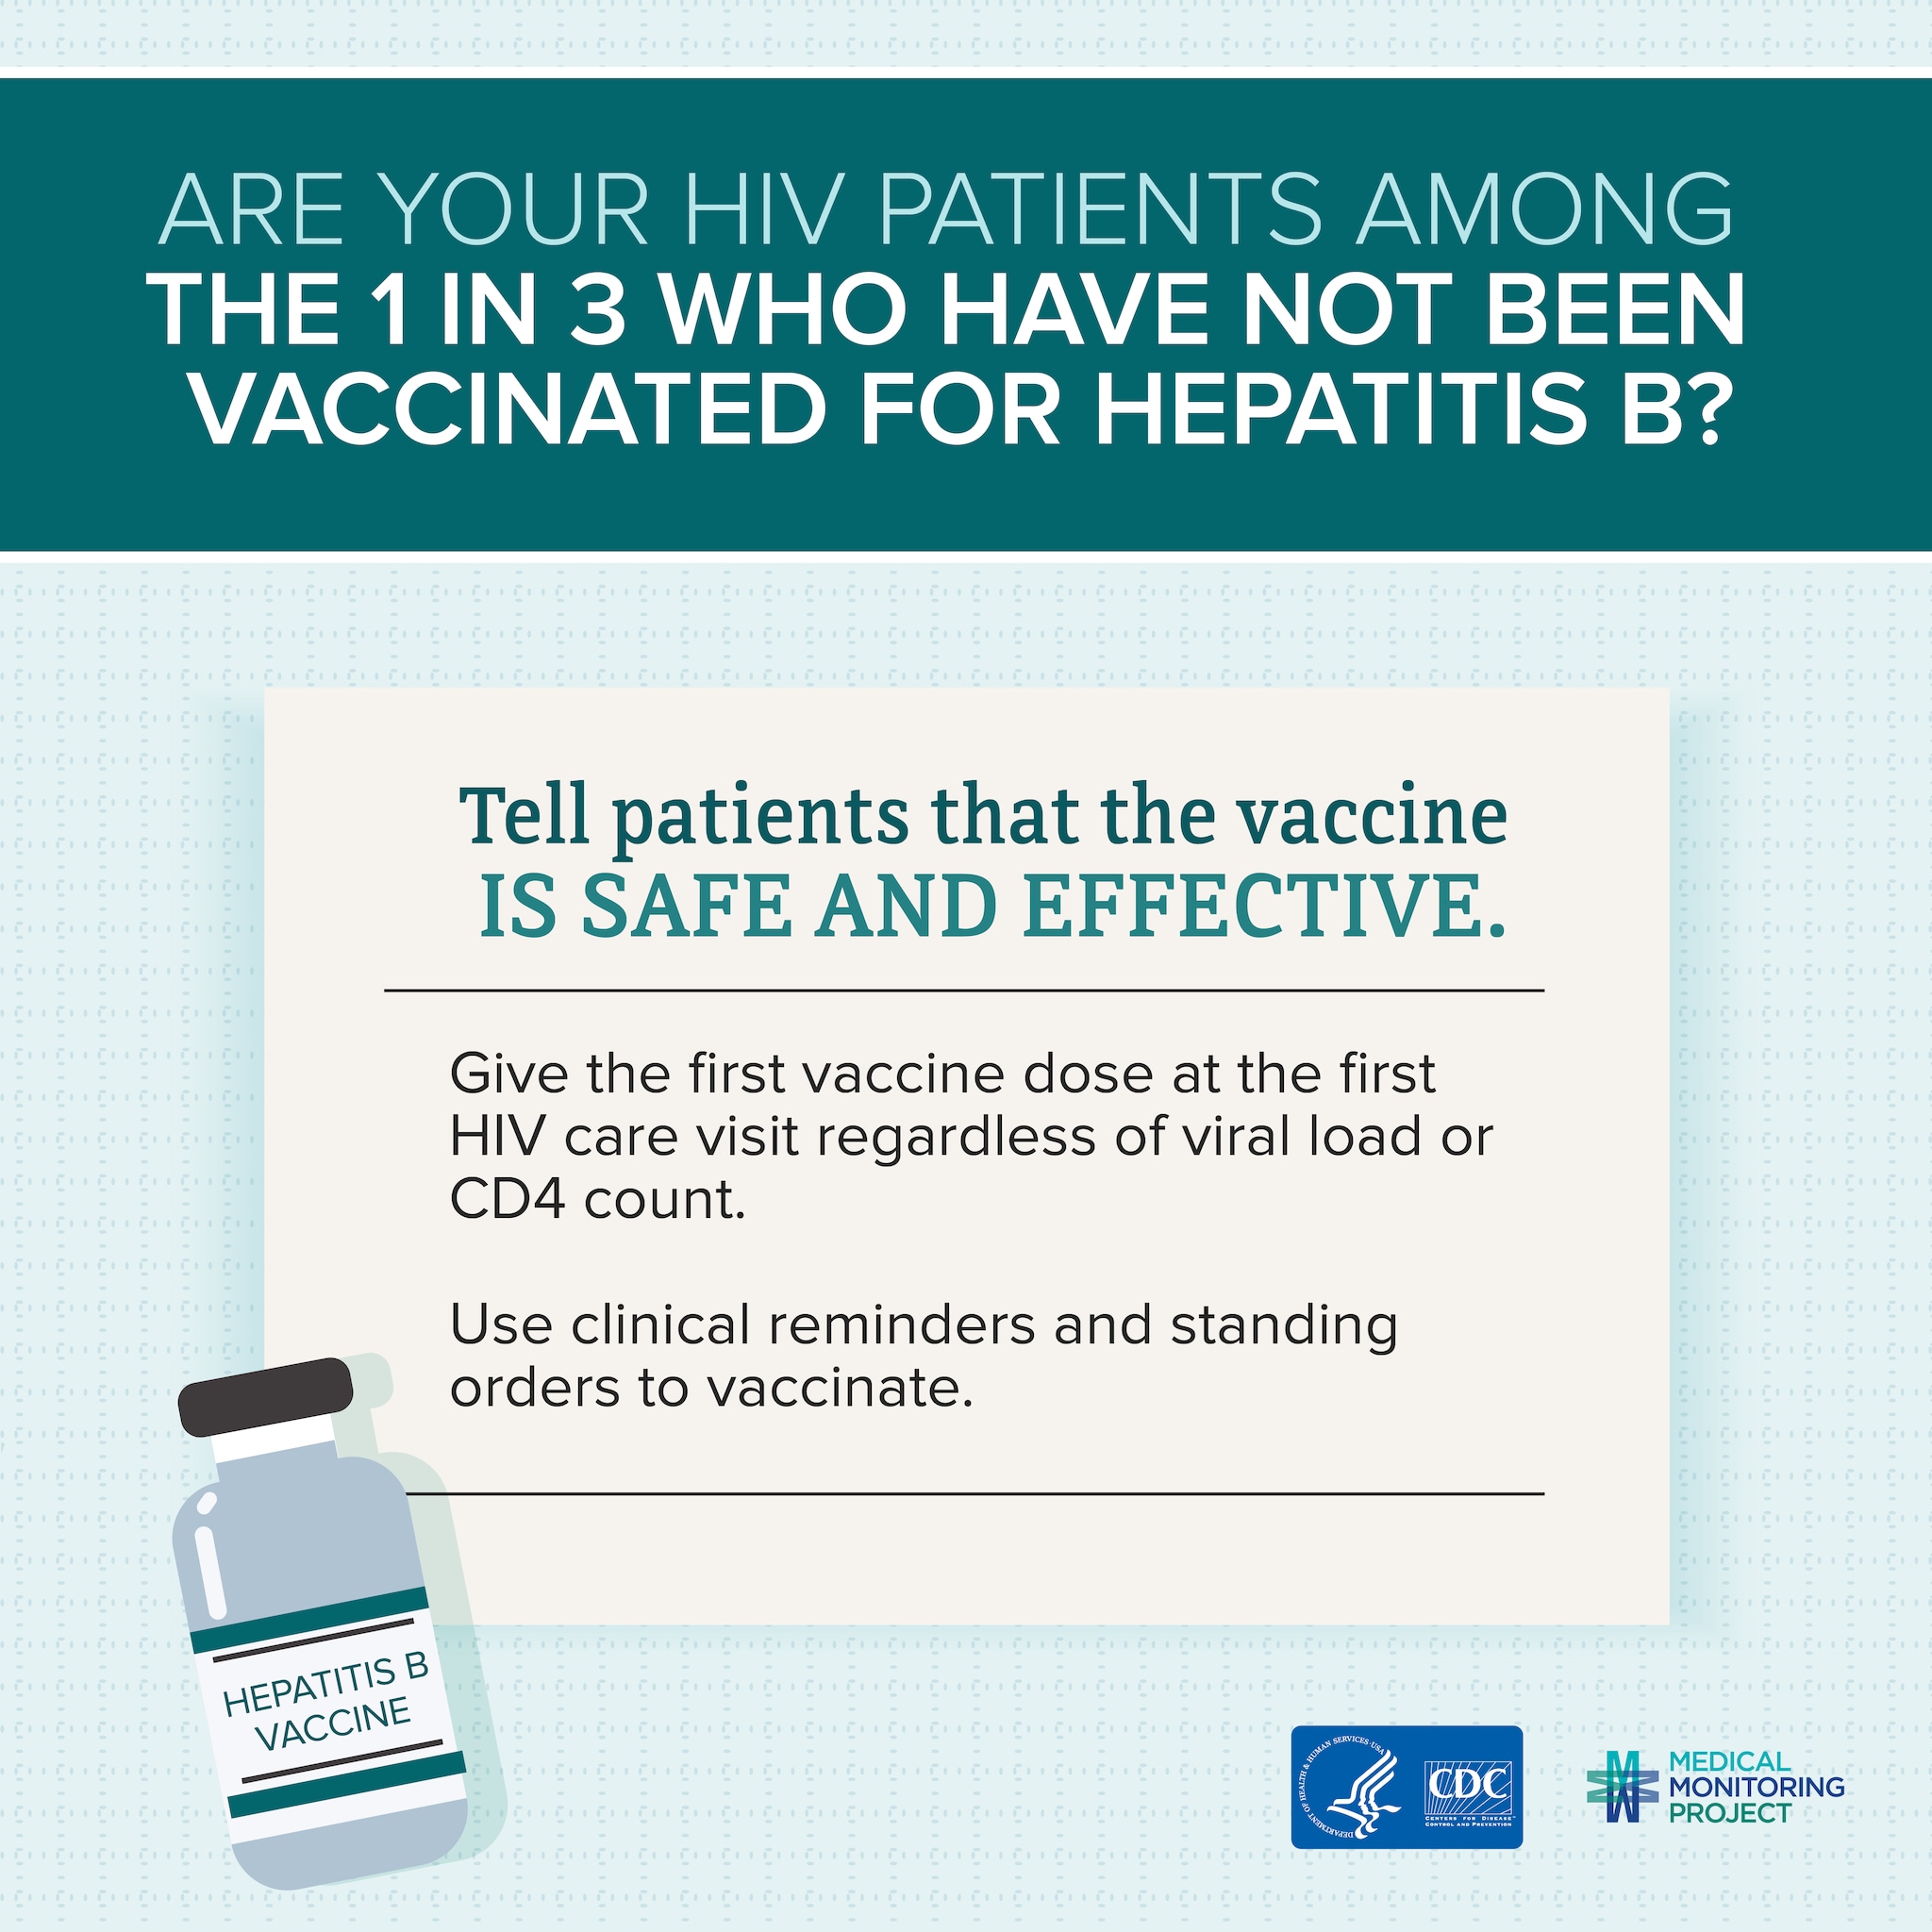 Infographic for providers with patients living with HIV